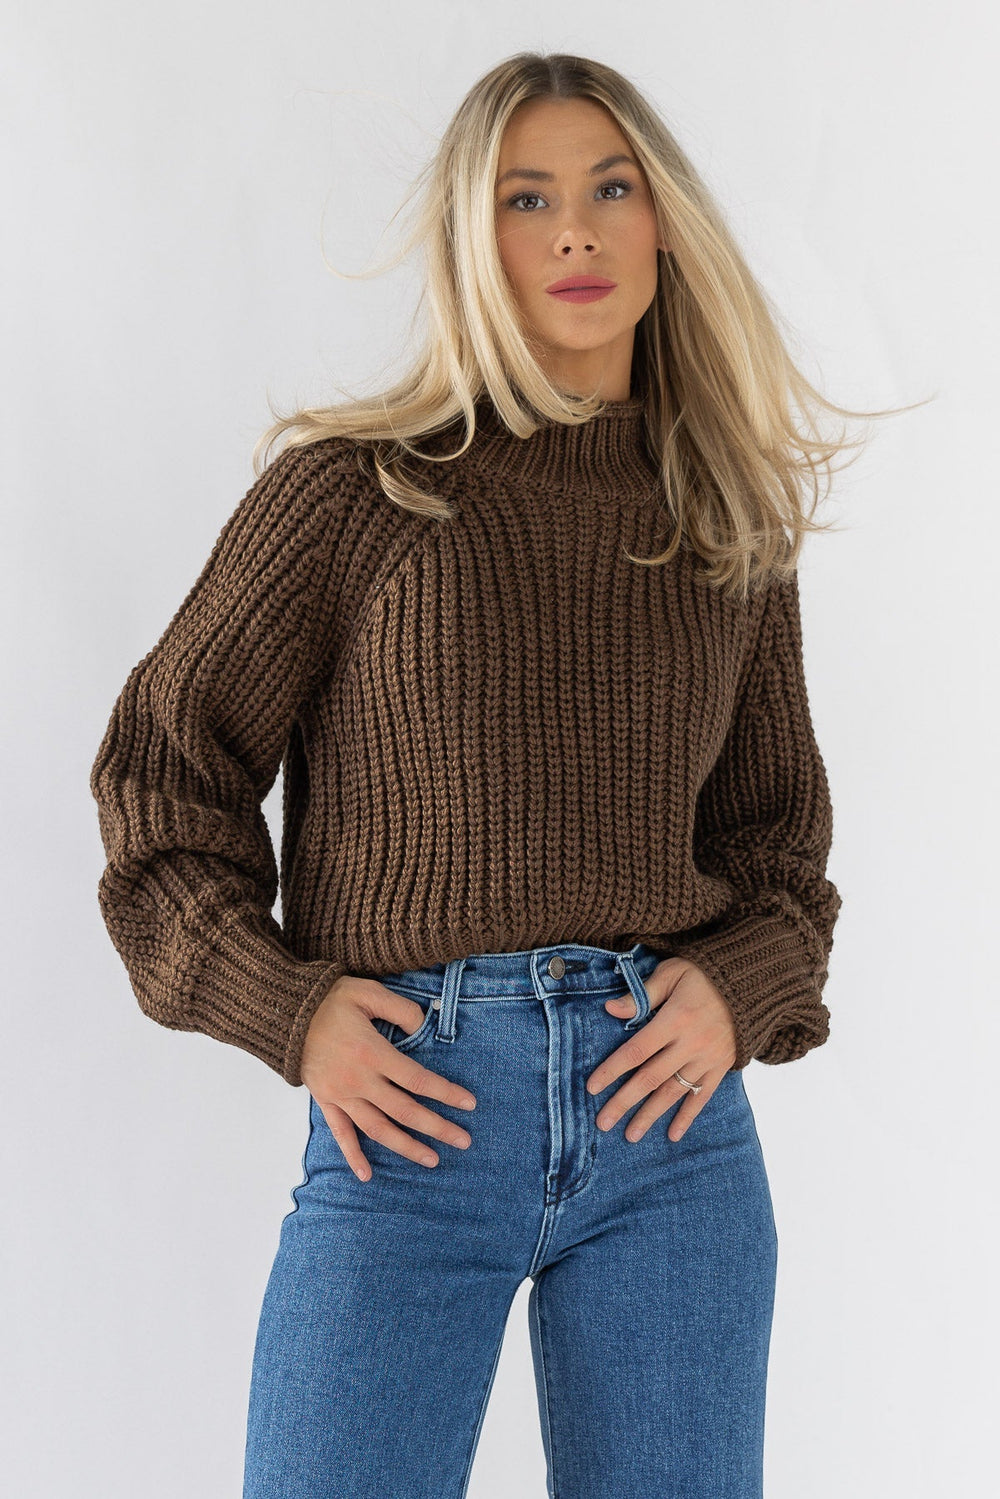 Cozy Conditions Sweater - Brown - JO+CO